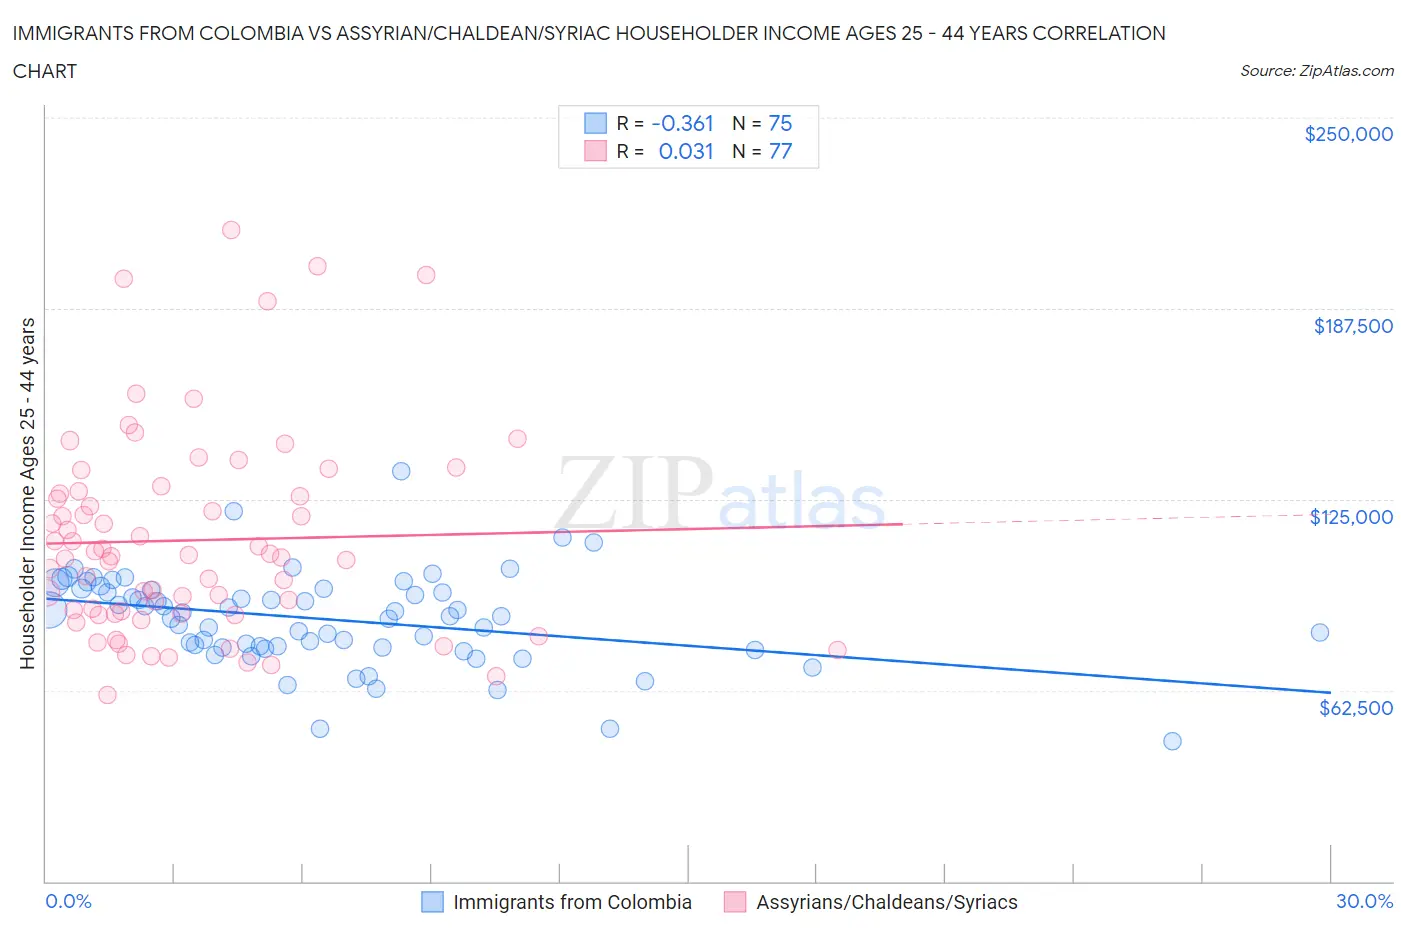 Immigrants from Colombia vs Assyrian/Chaldean/Syriac Householder Income Ages 25 - 44 years